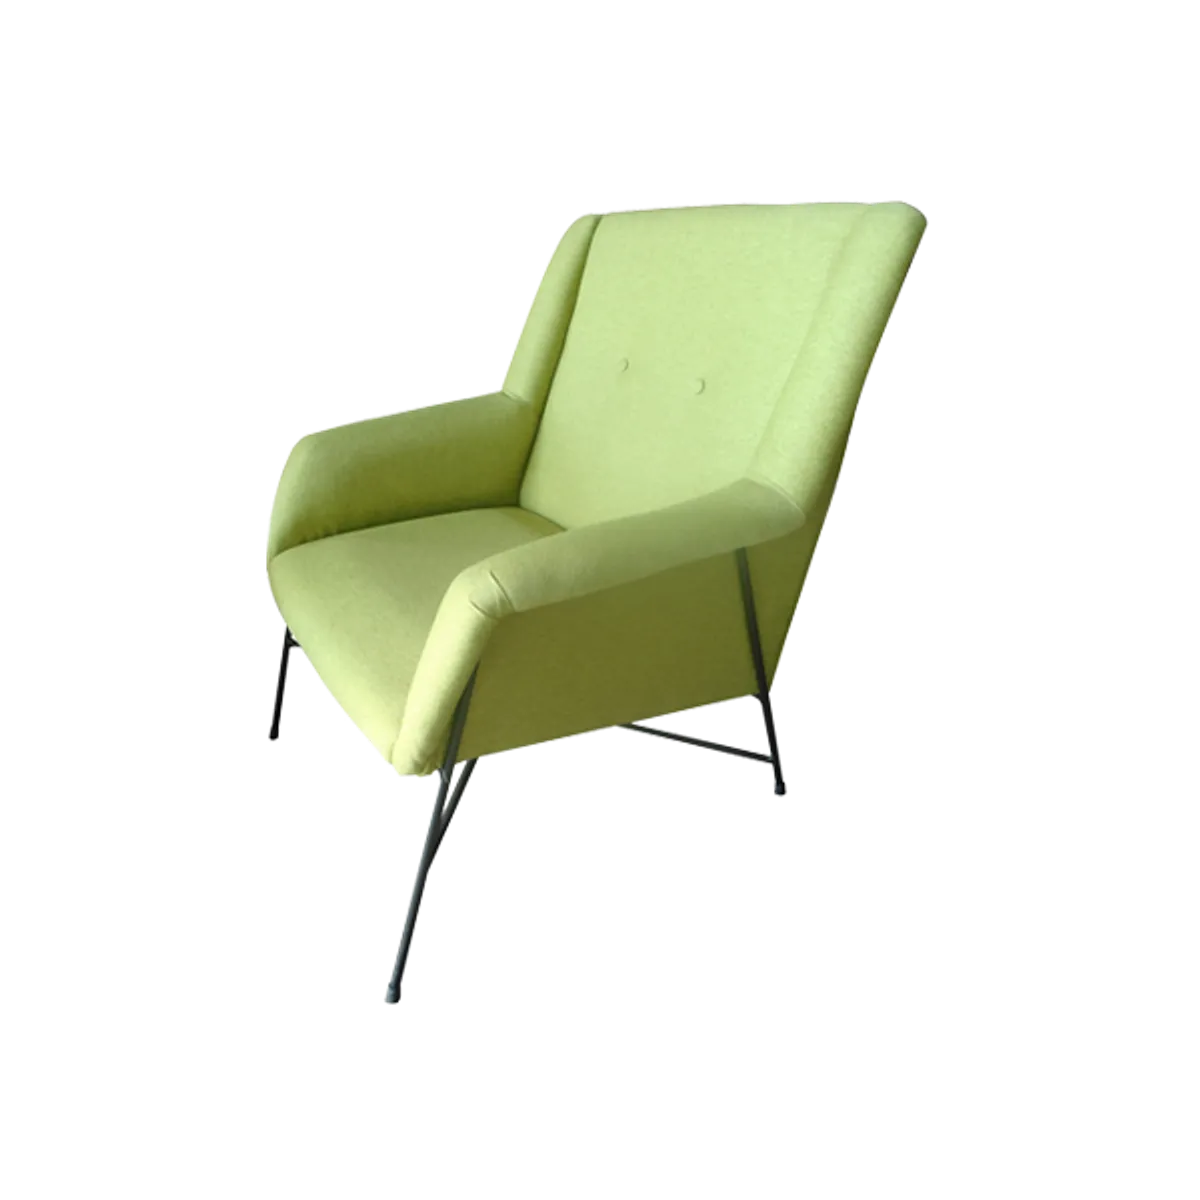 Mount Armchair Metal Frame Lounge Seating Inside Out Contracts